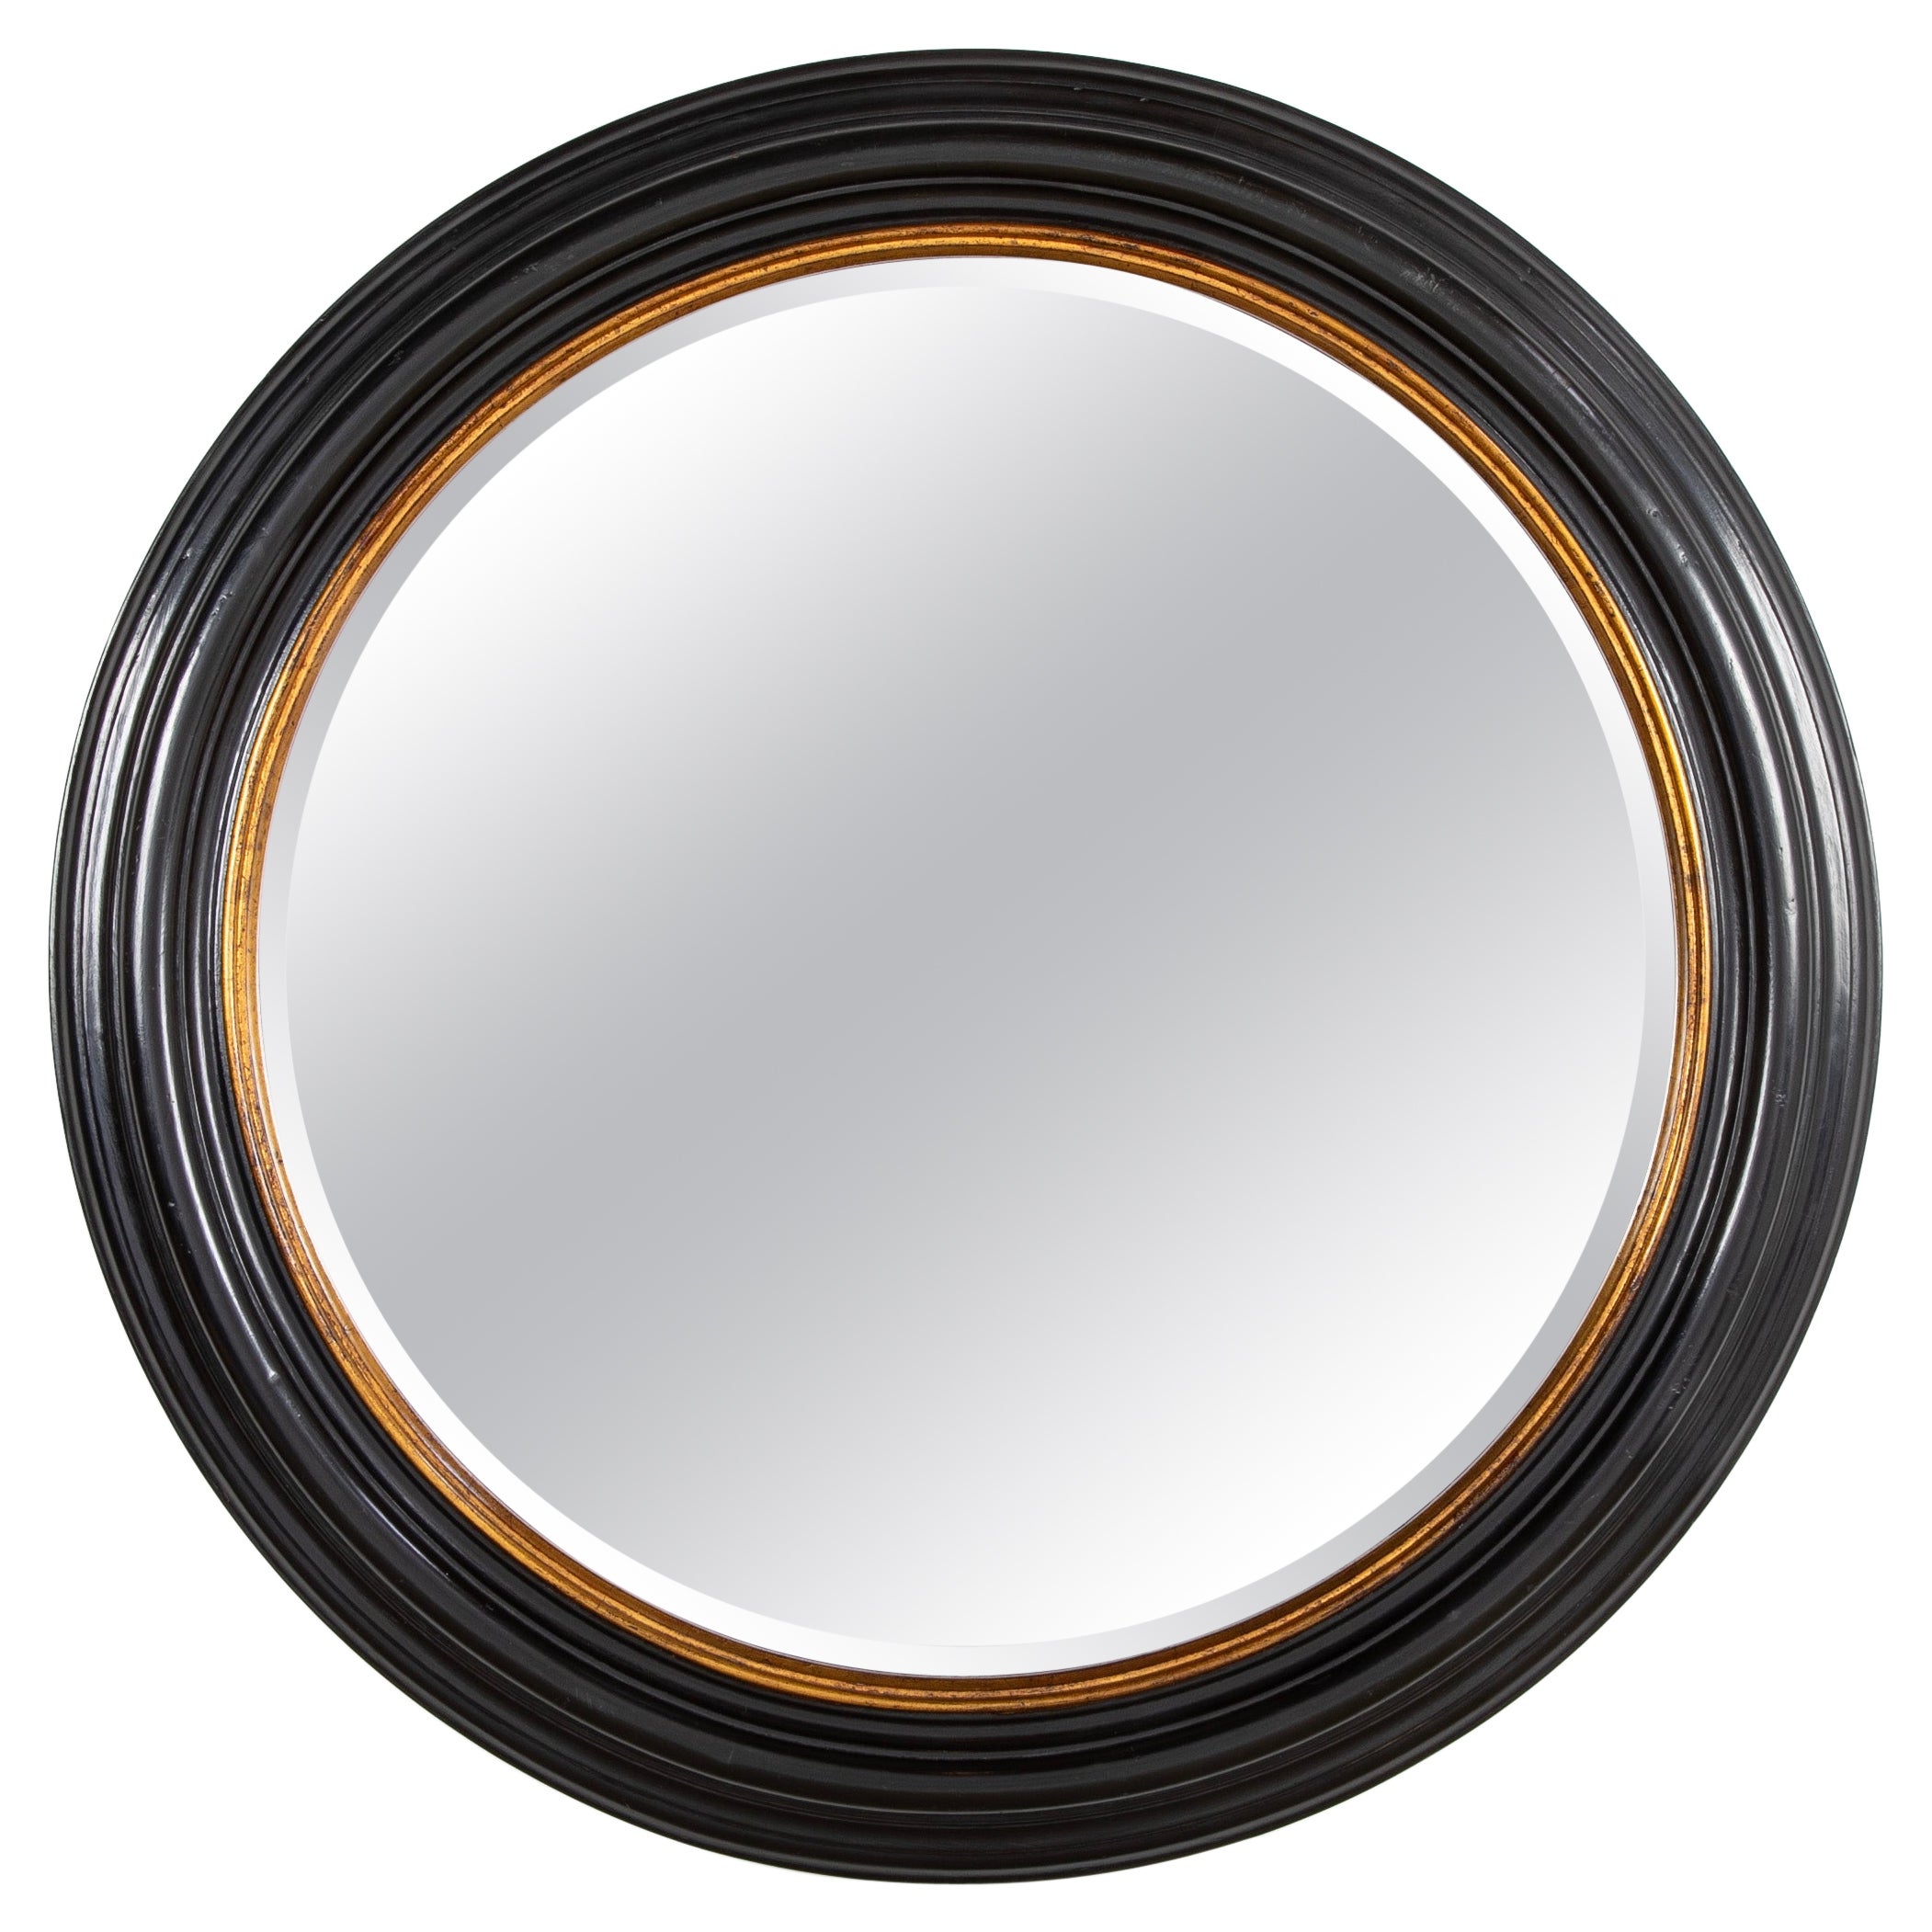 Regency Black Lacquer And Gilt Round Mirror With Beveled Glass, Large Scale For Sale